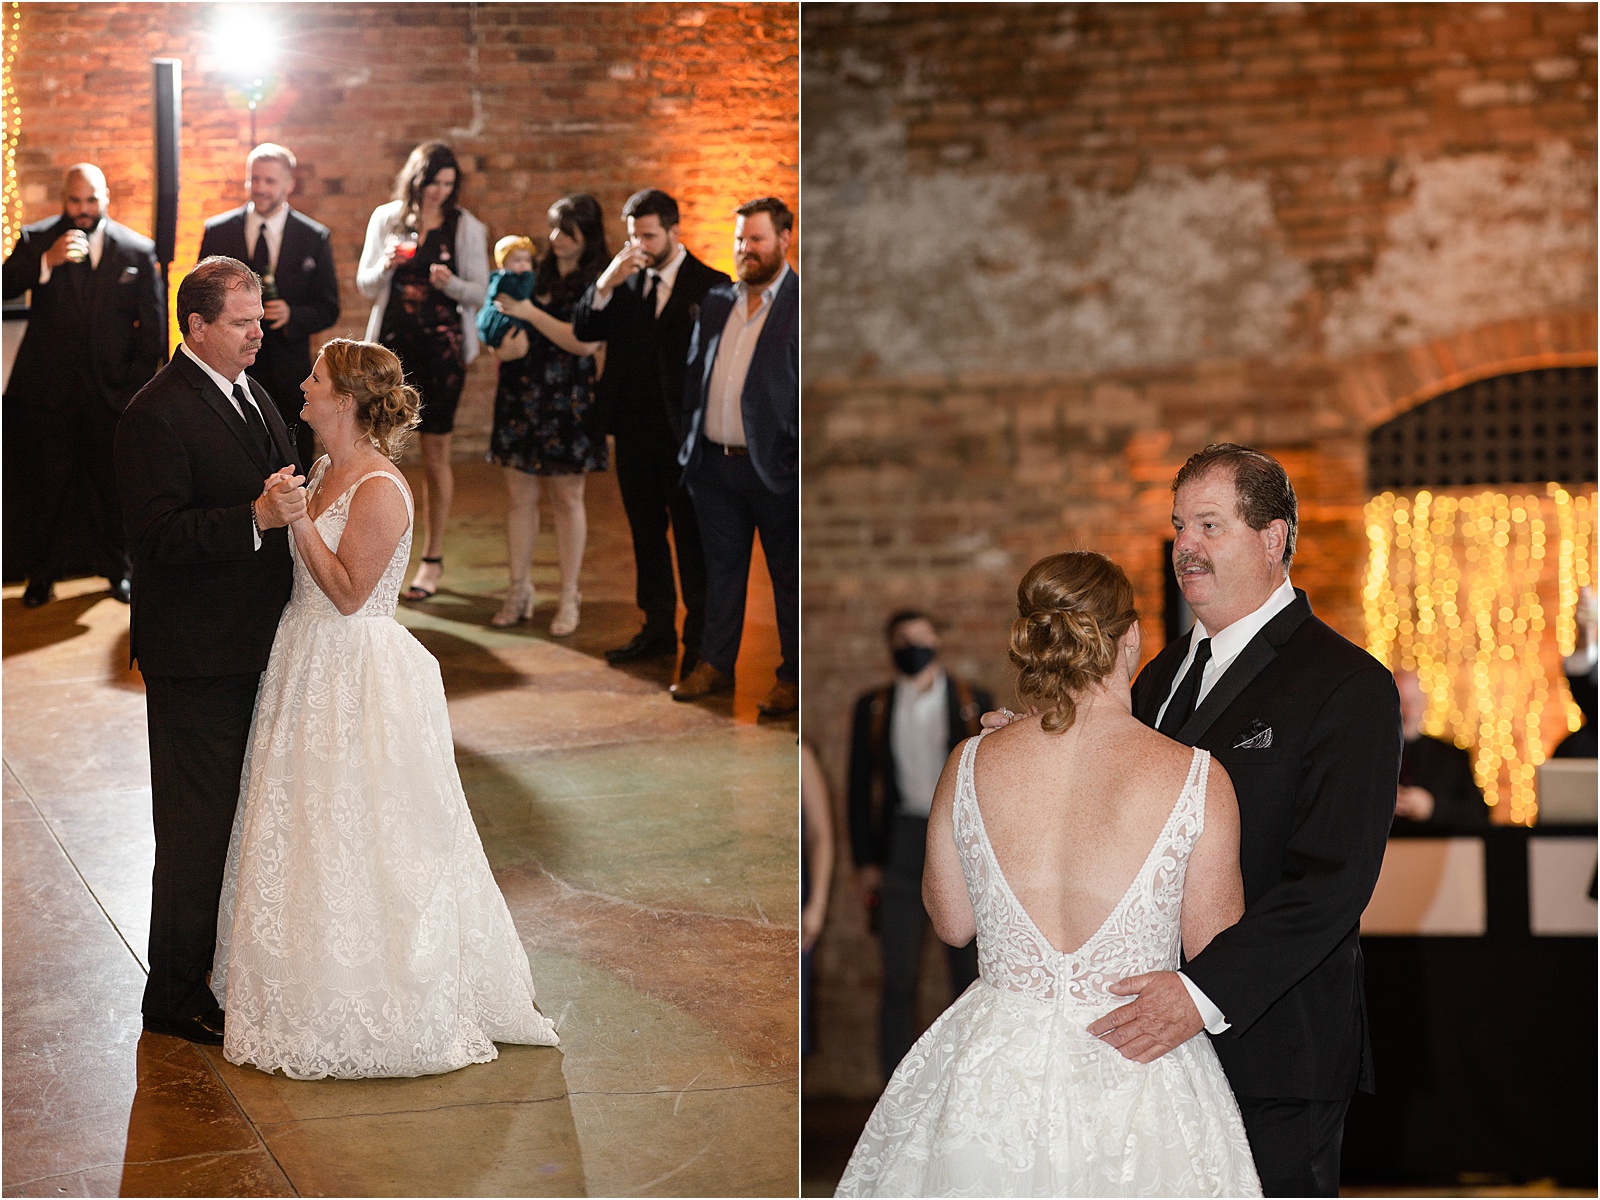 Just married bride dancing with her father in black tux at Old Cigar Warehouse